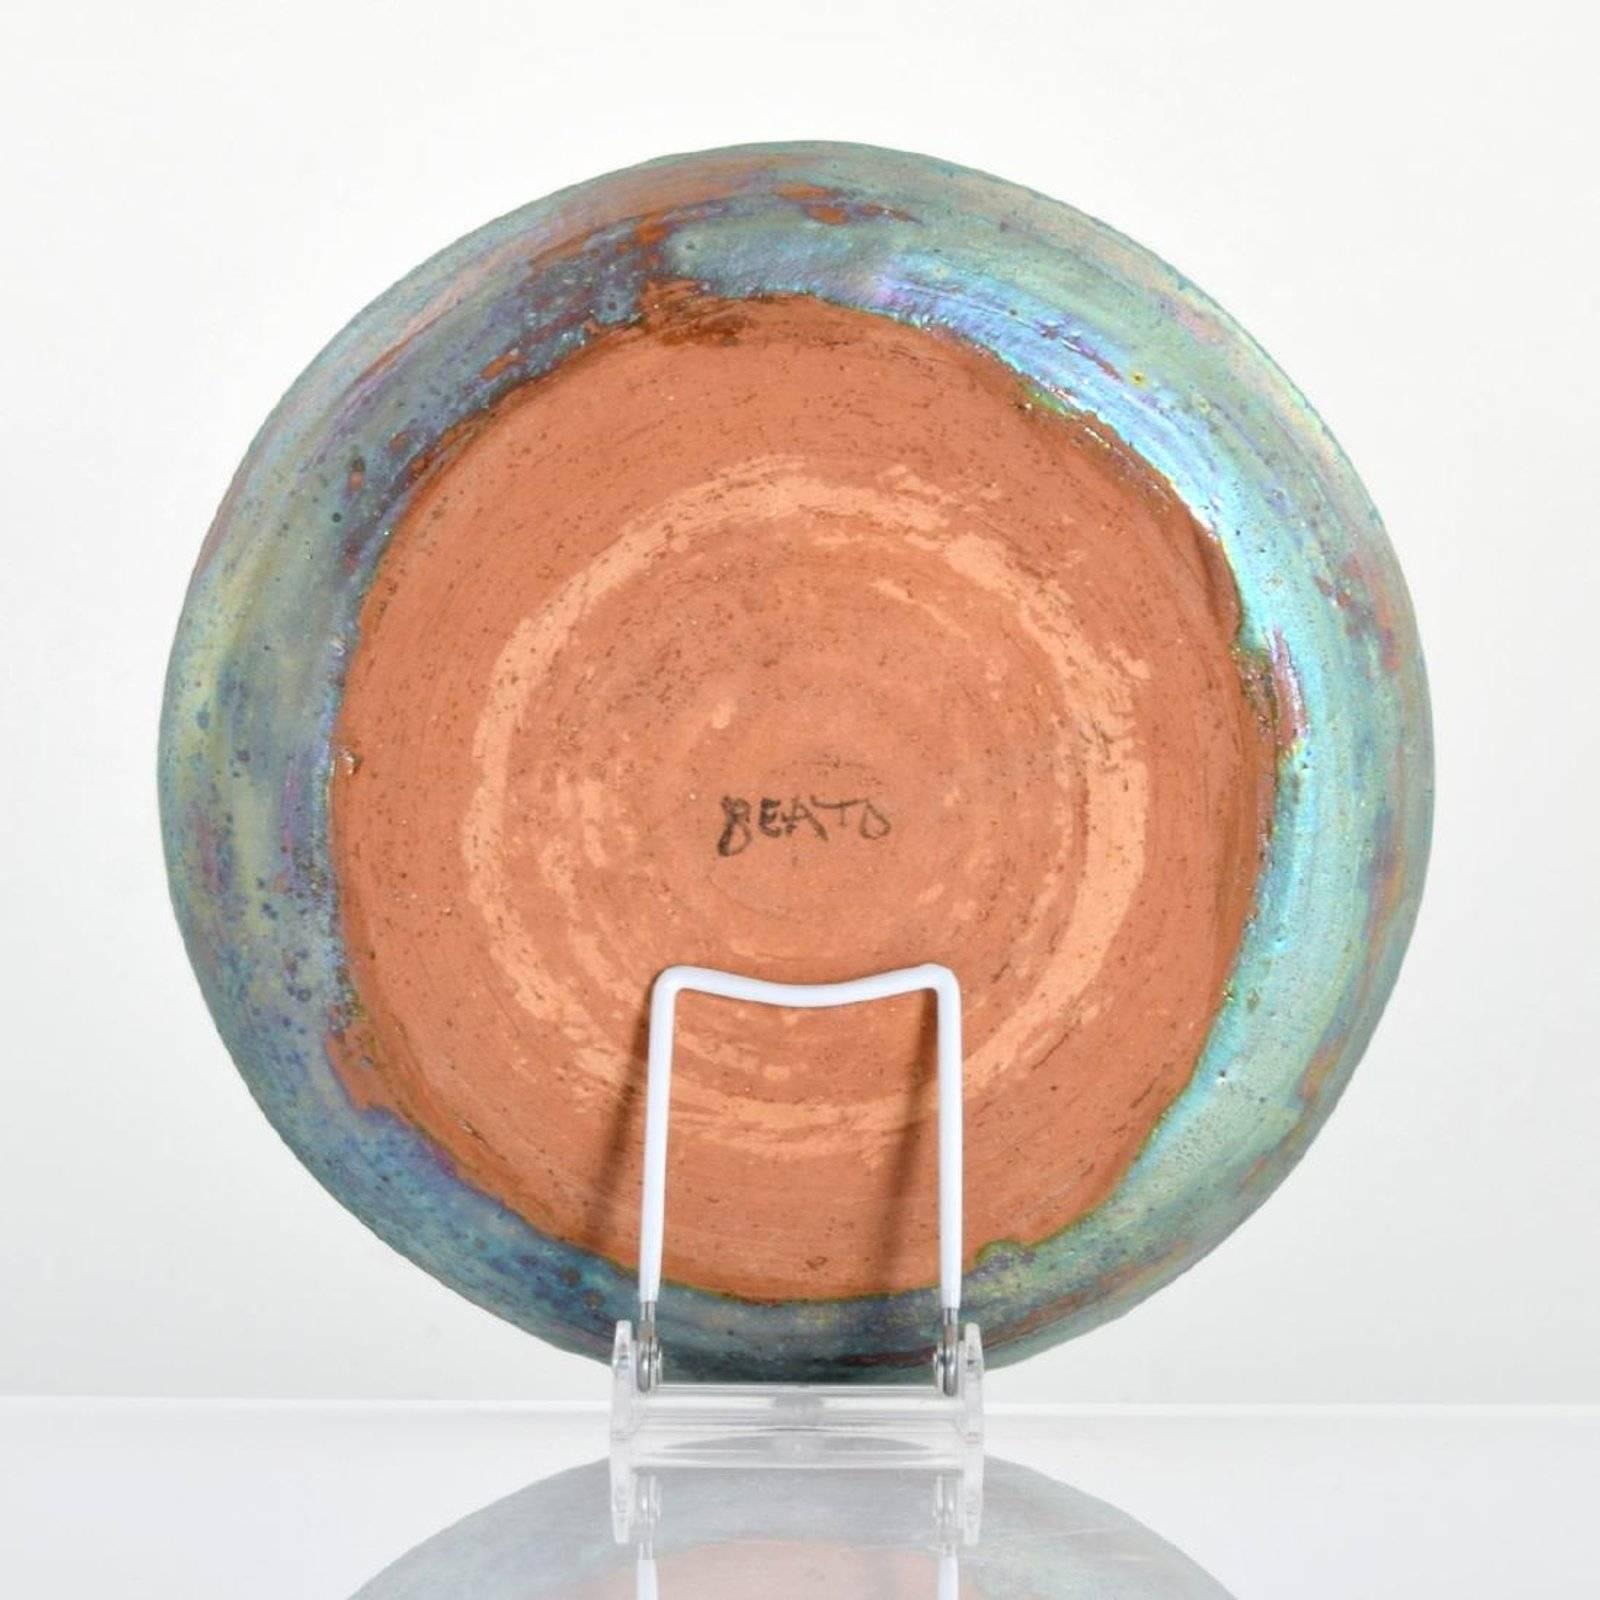 Plate by Beatrice Wood (1893-1998). Provenance: Zachary Waller Gallery, Los Angeles, California.

Markings: signed

Materials: glazed earthenware.
 